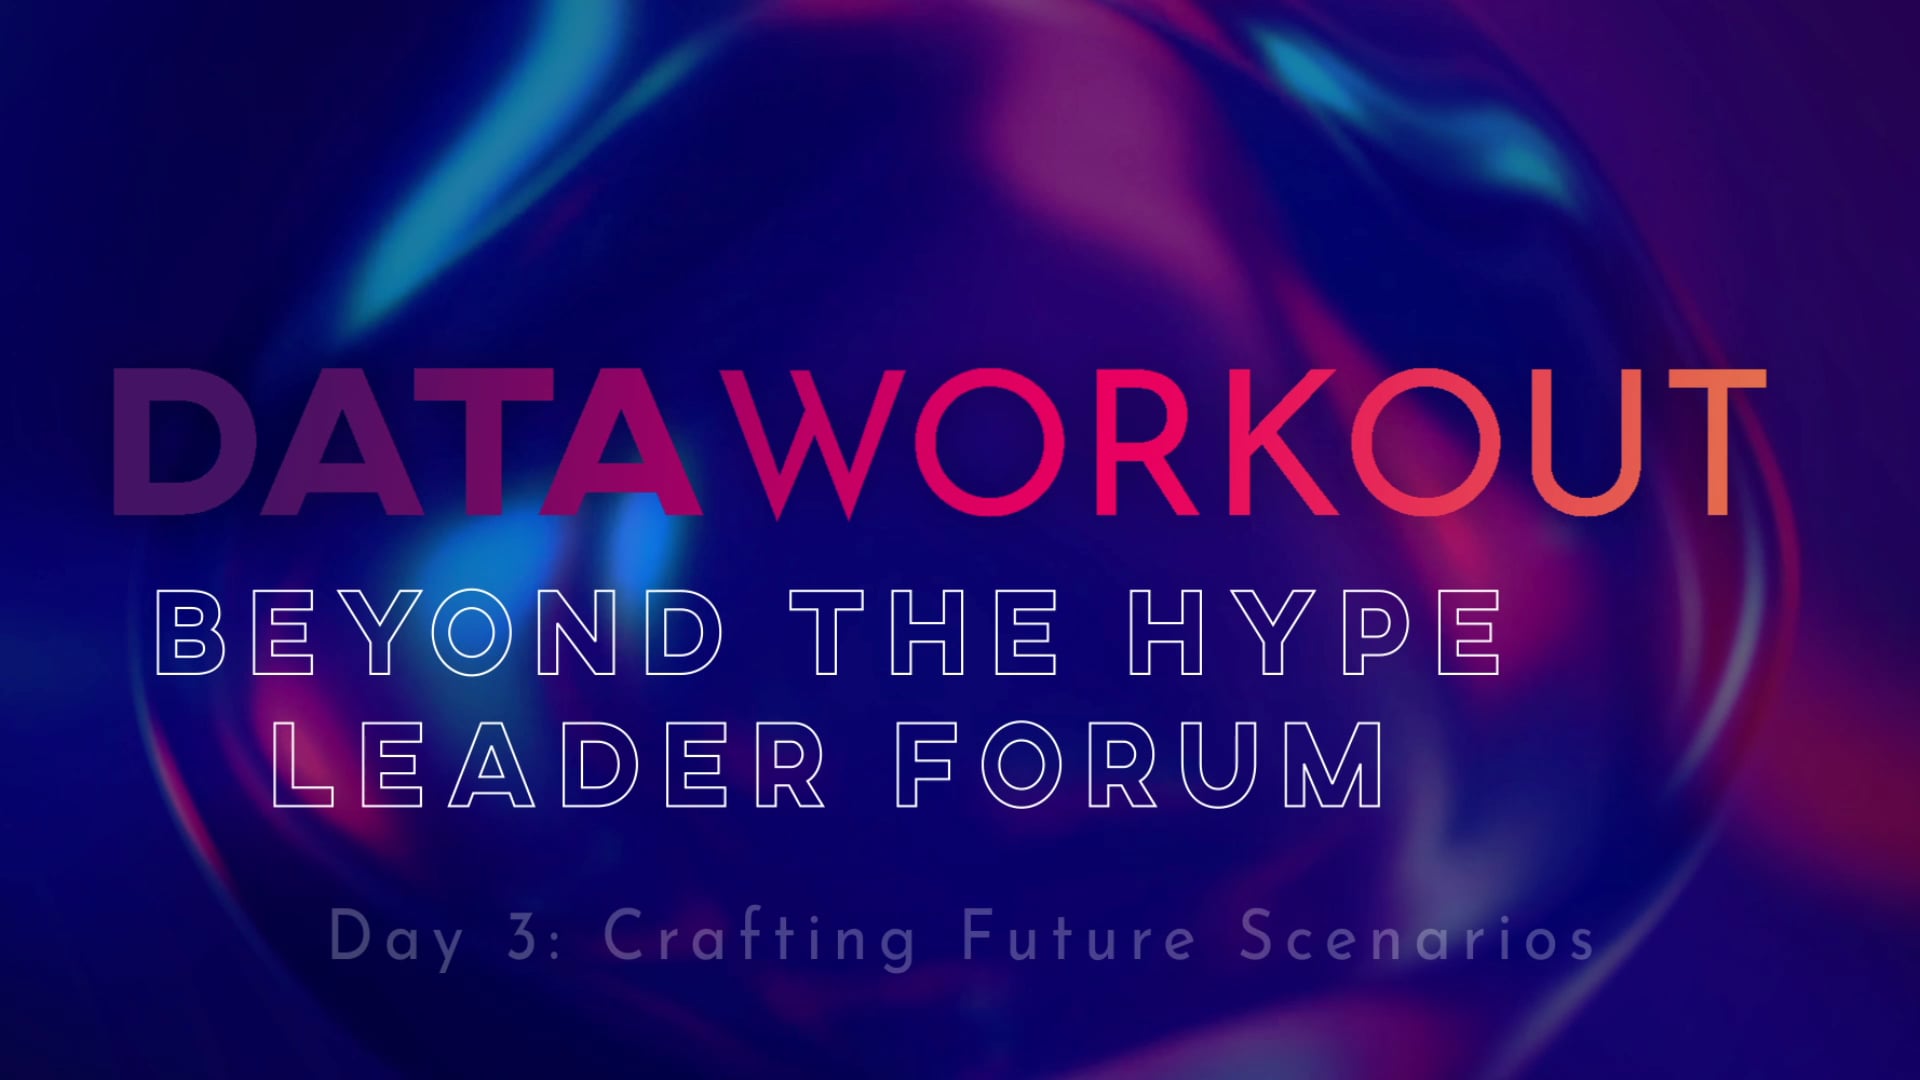 Beyond The Hype Leader Forum: Day 3 Trailer